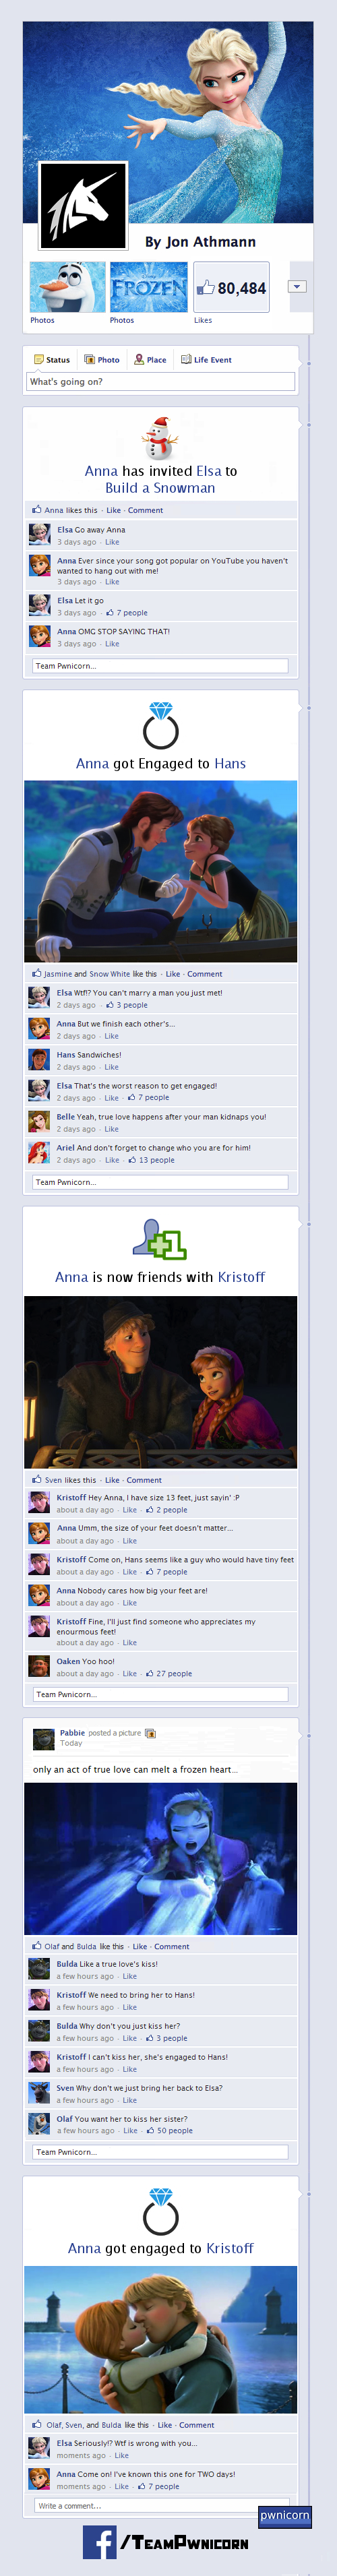 Frozen Told Through Facebook from Team Pwnicorn